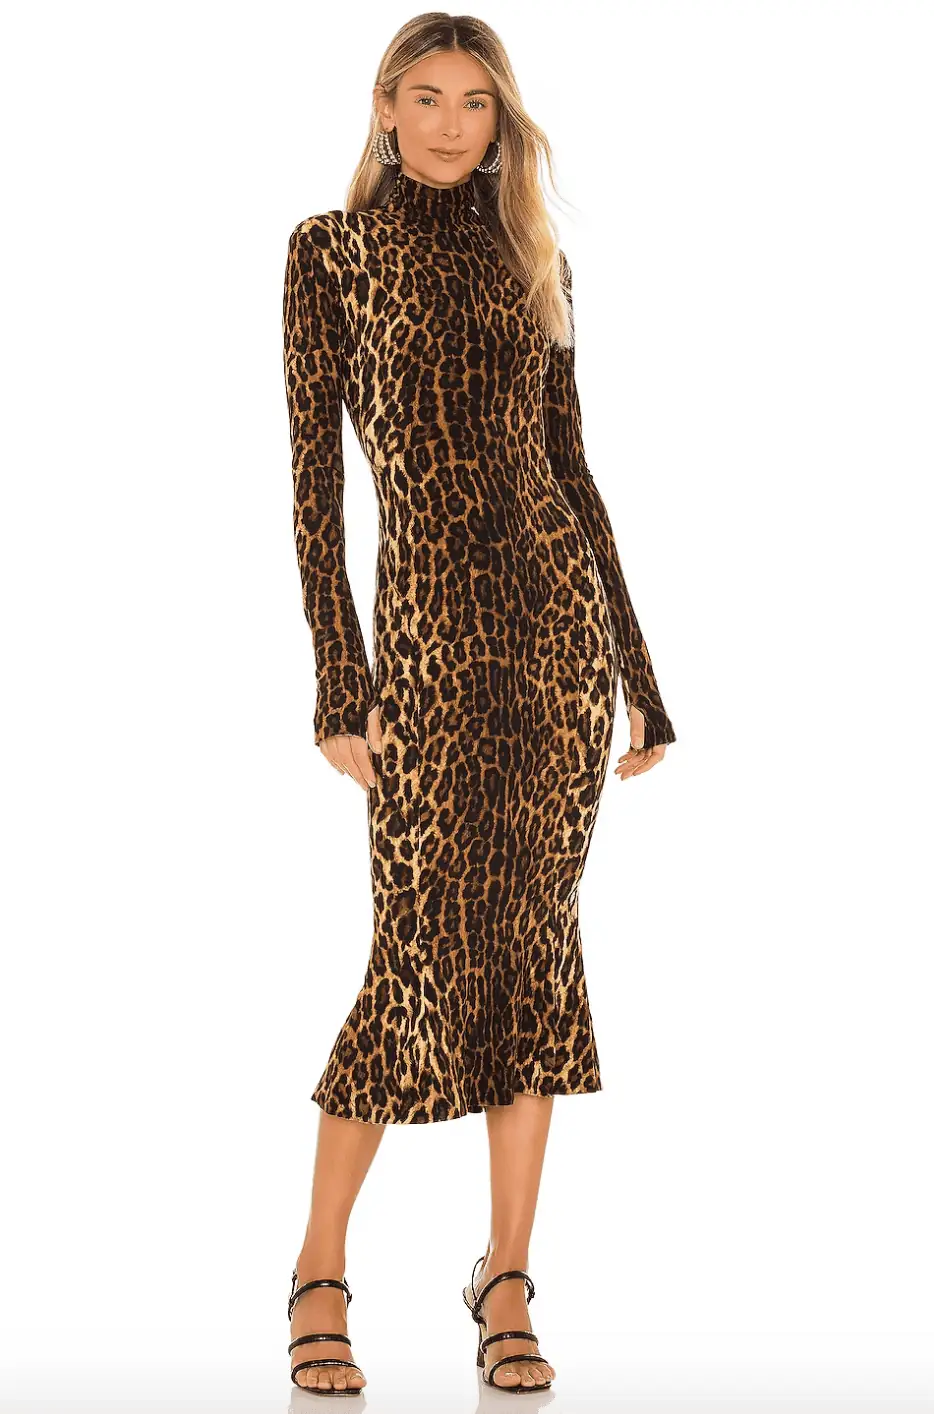 Heather Dubrow's Leopard Print Confessional Dress